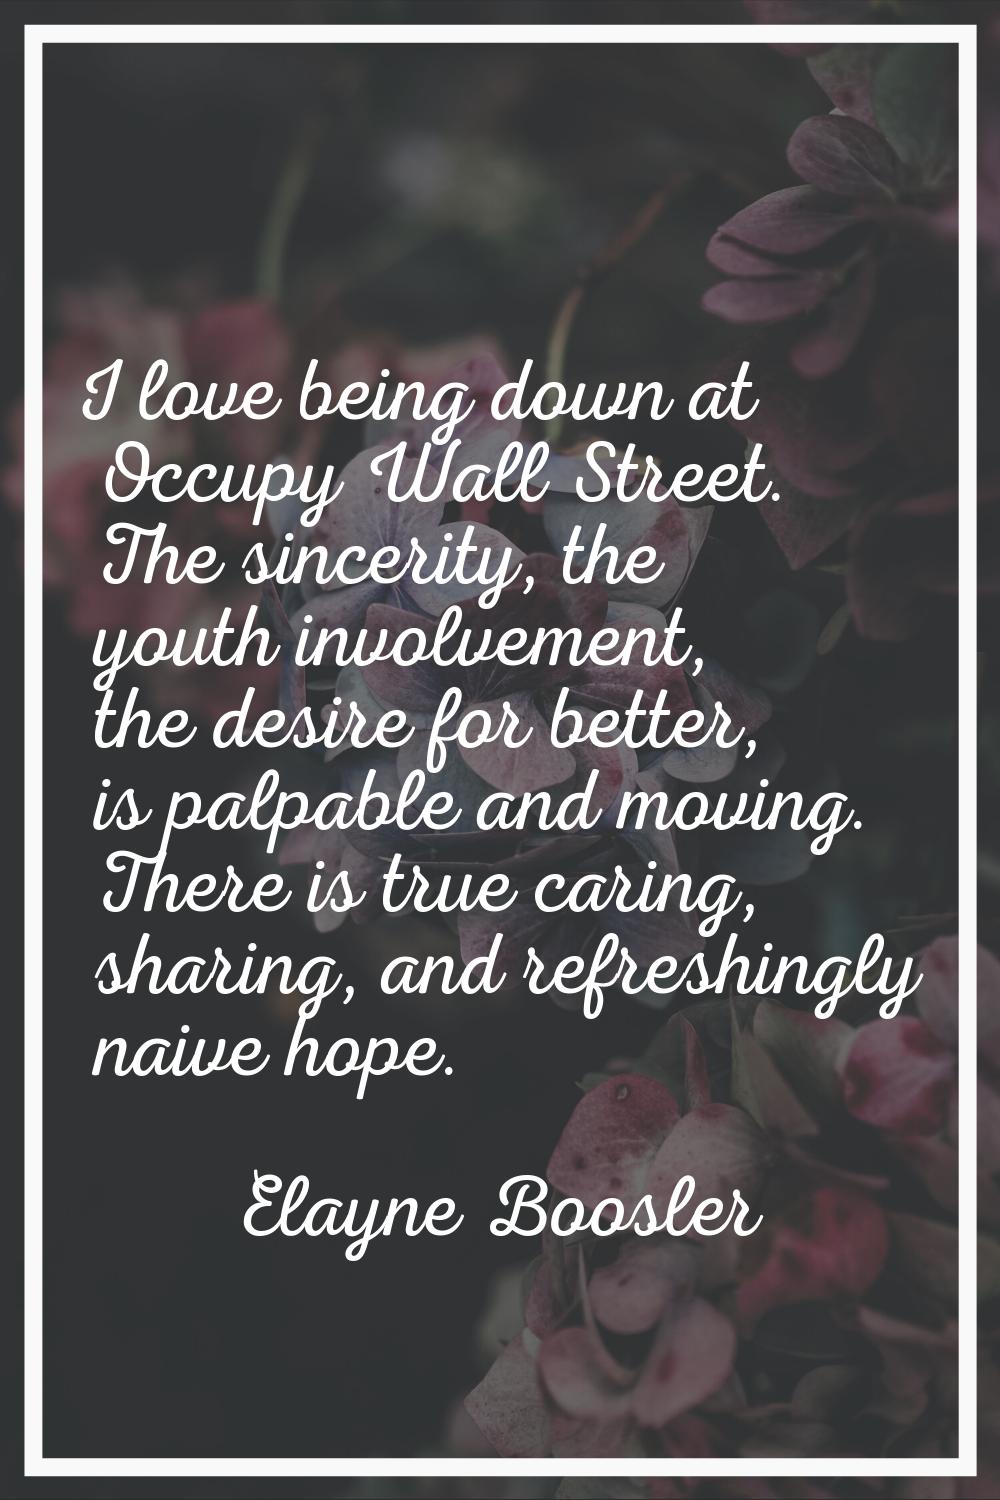 I love being down at Occupy Wall Street. The sincerity, the youth involvement, the desire for bette